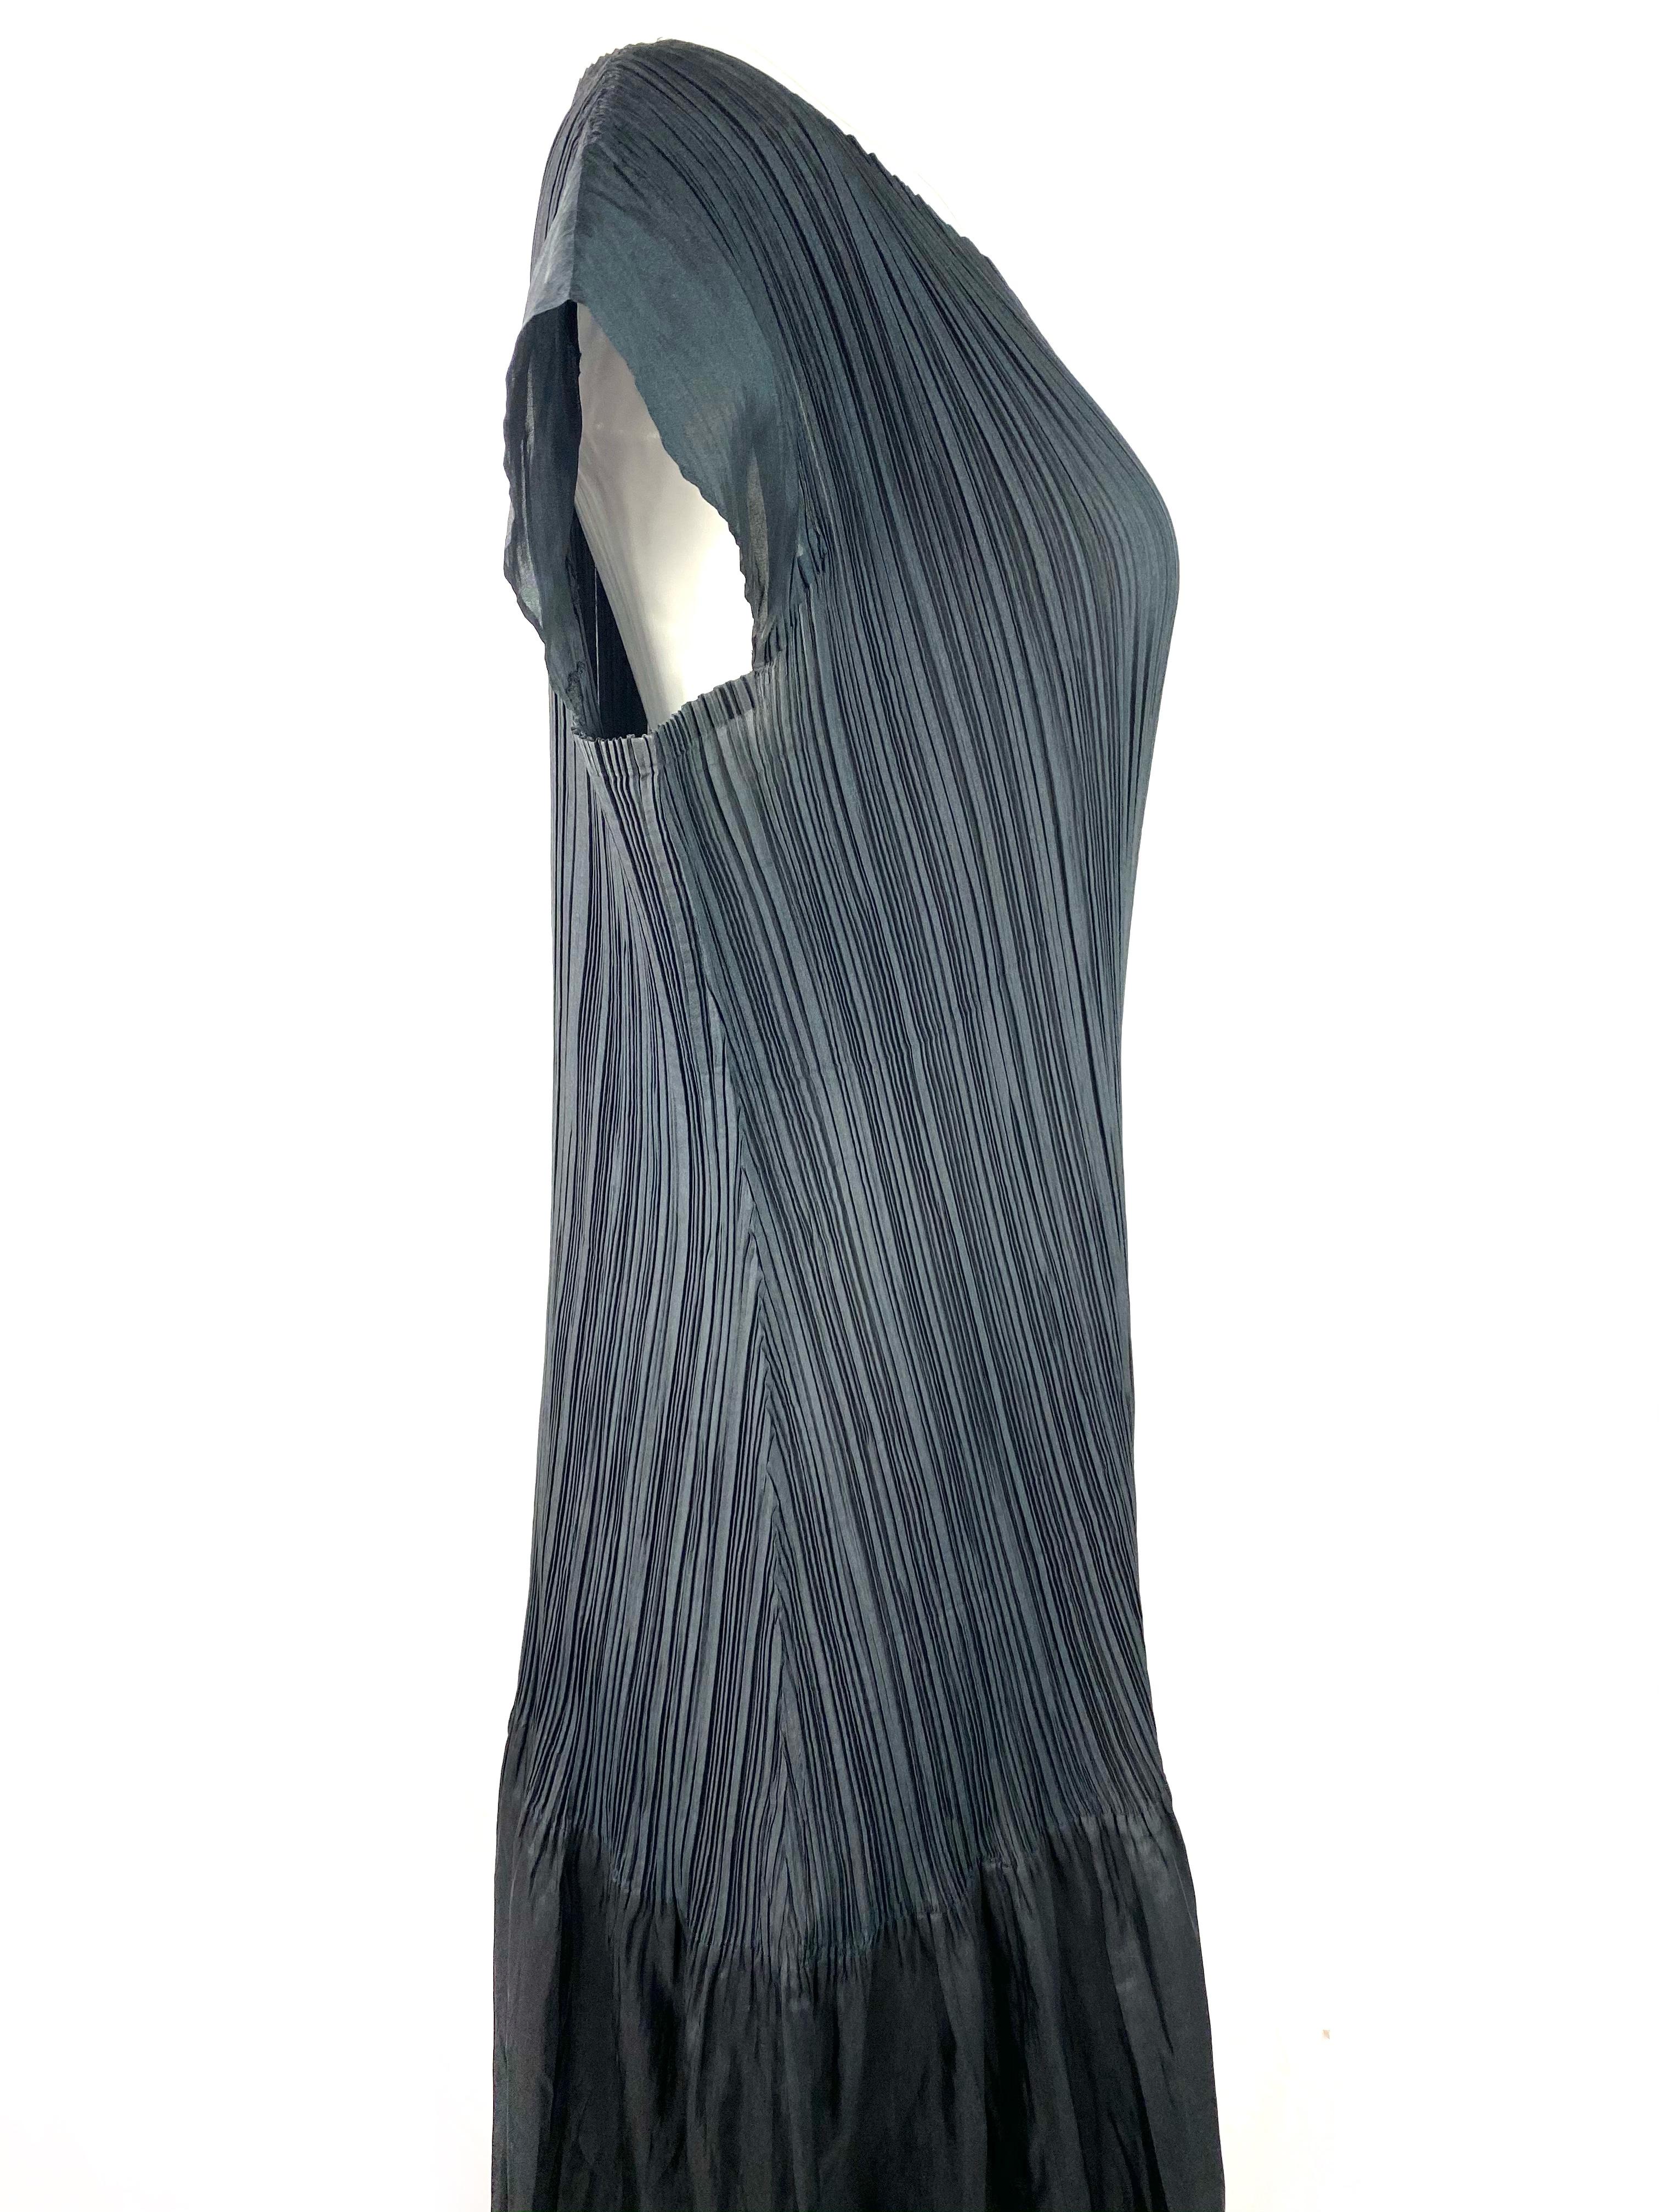 Issey Miyake Fete Black Short Sleeves Maxi Dress, Size 4 In Excellent Condition For Sale In Beverly Hills, CA